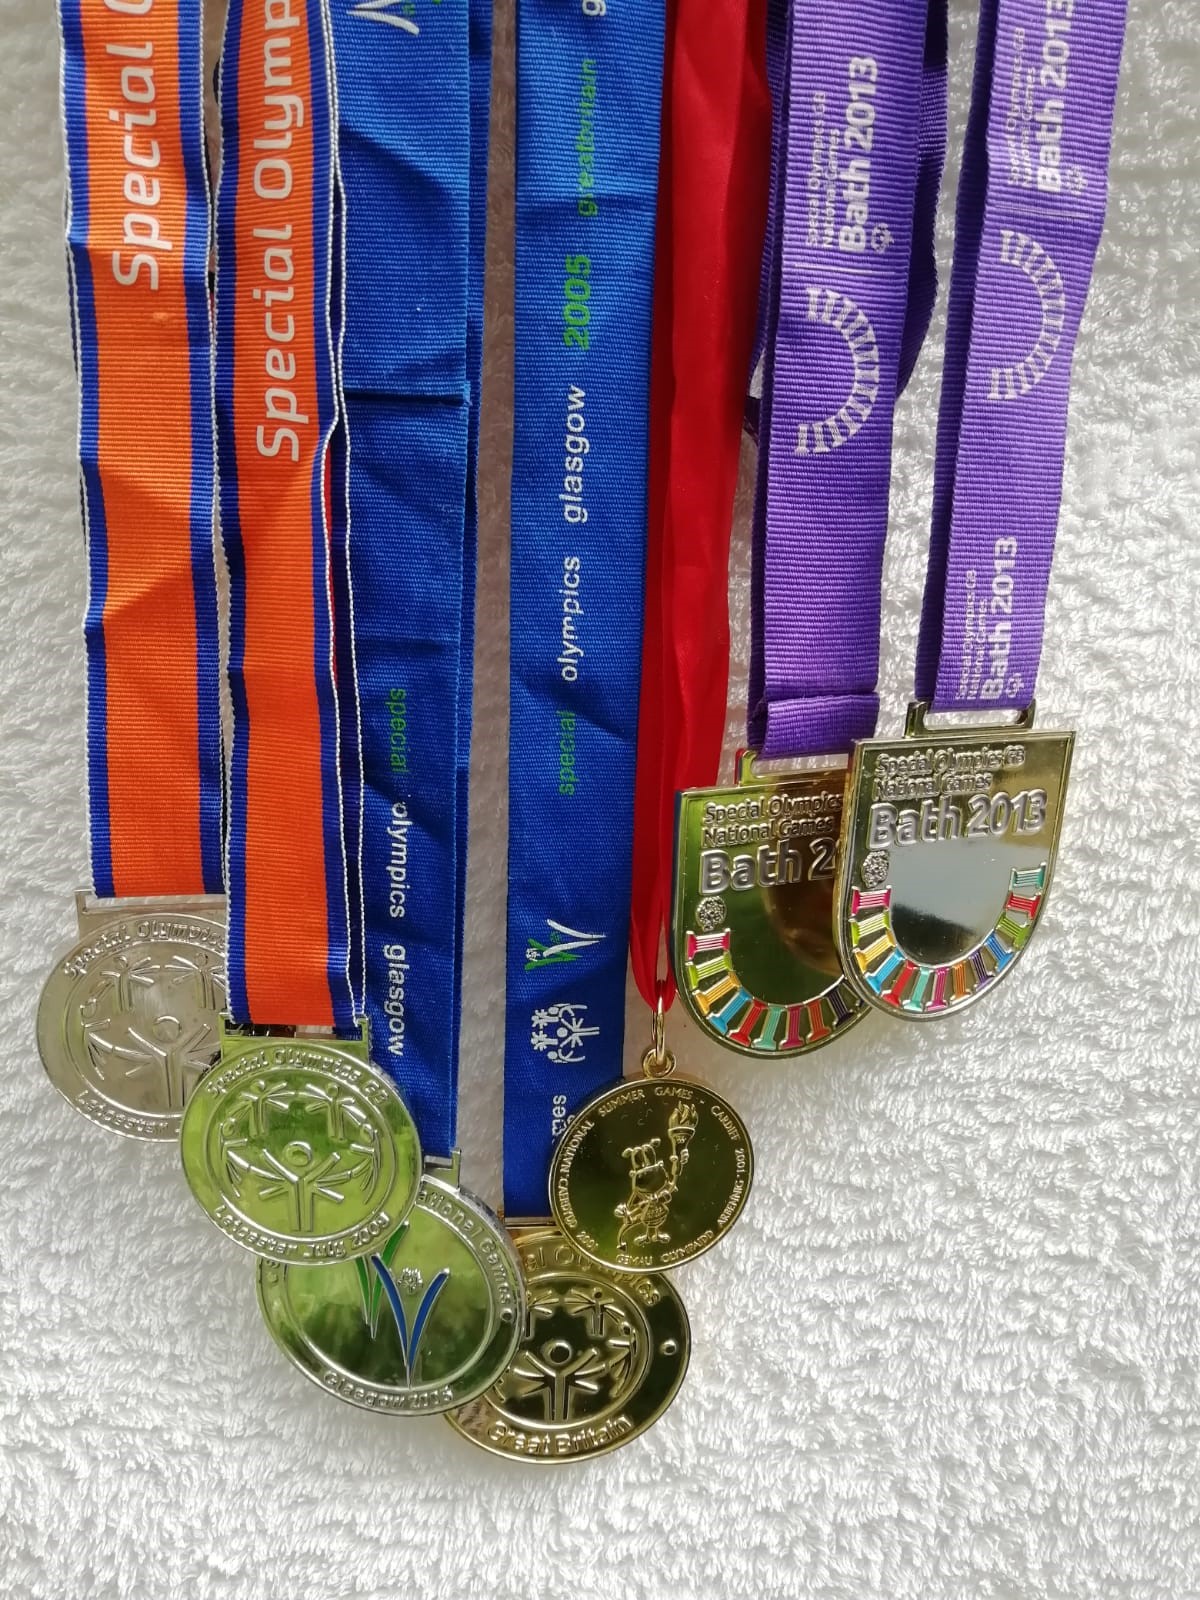 Seven sports medals hang from their ribbons against a wall